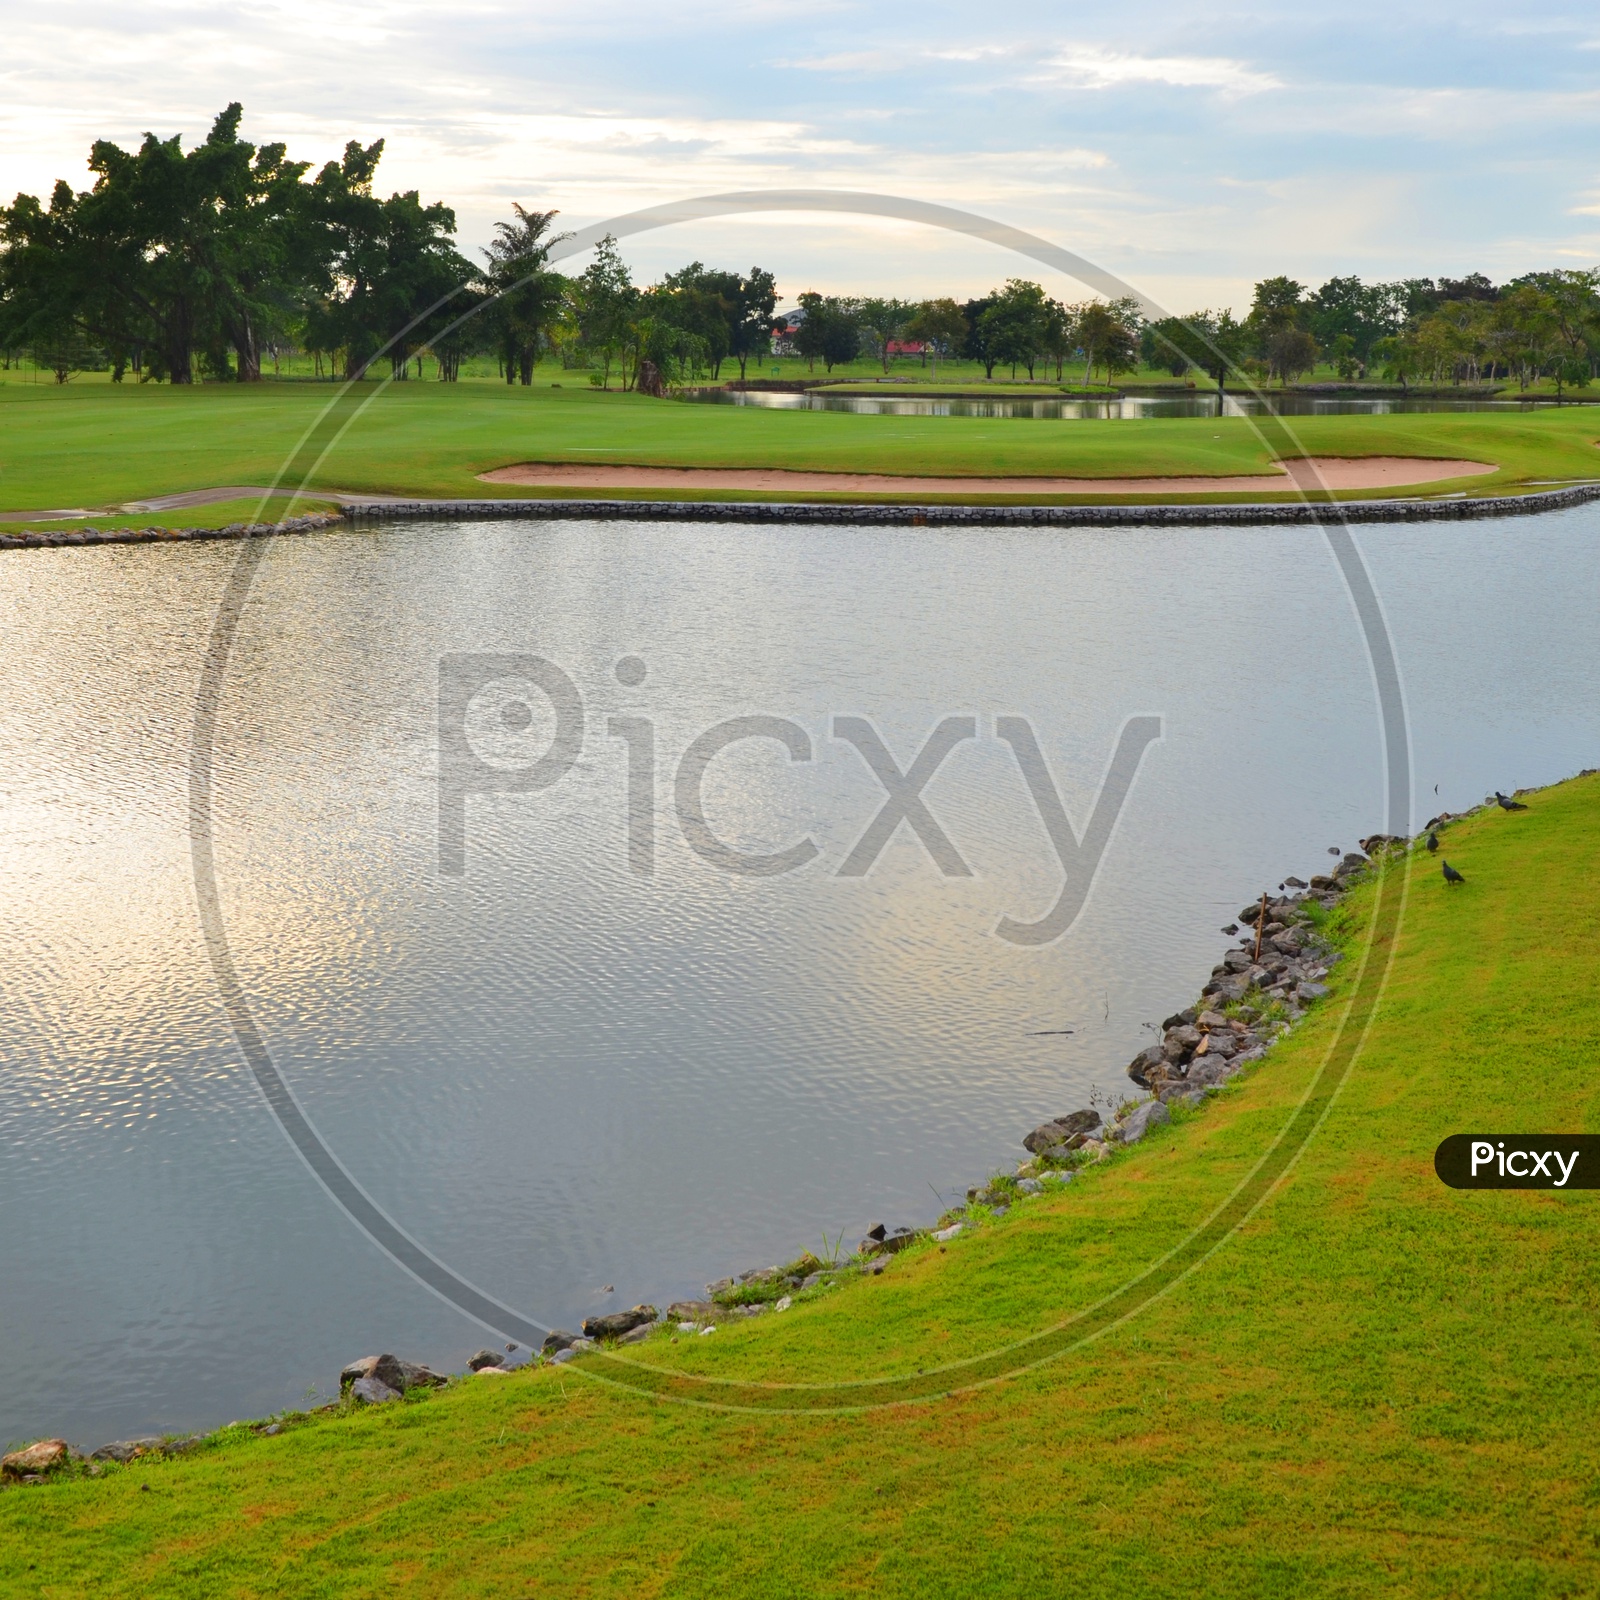 Lake at the green golf course in Thailand